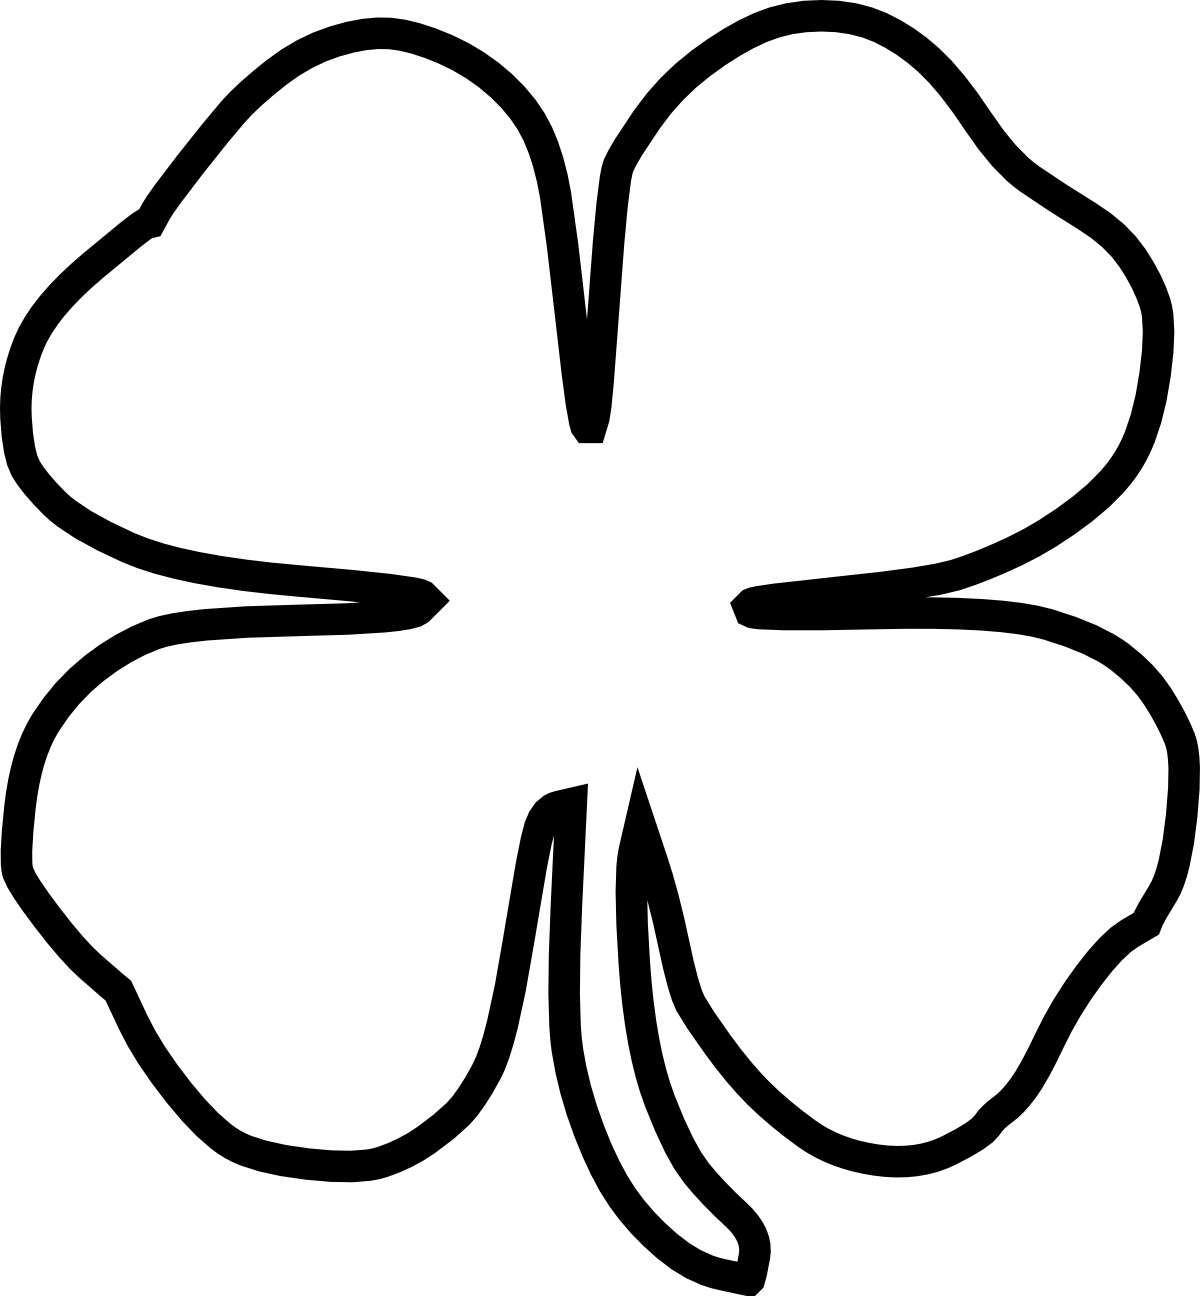 Four Leaf Clover Border Vector: AI and EPS Downloads